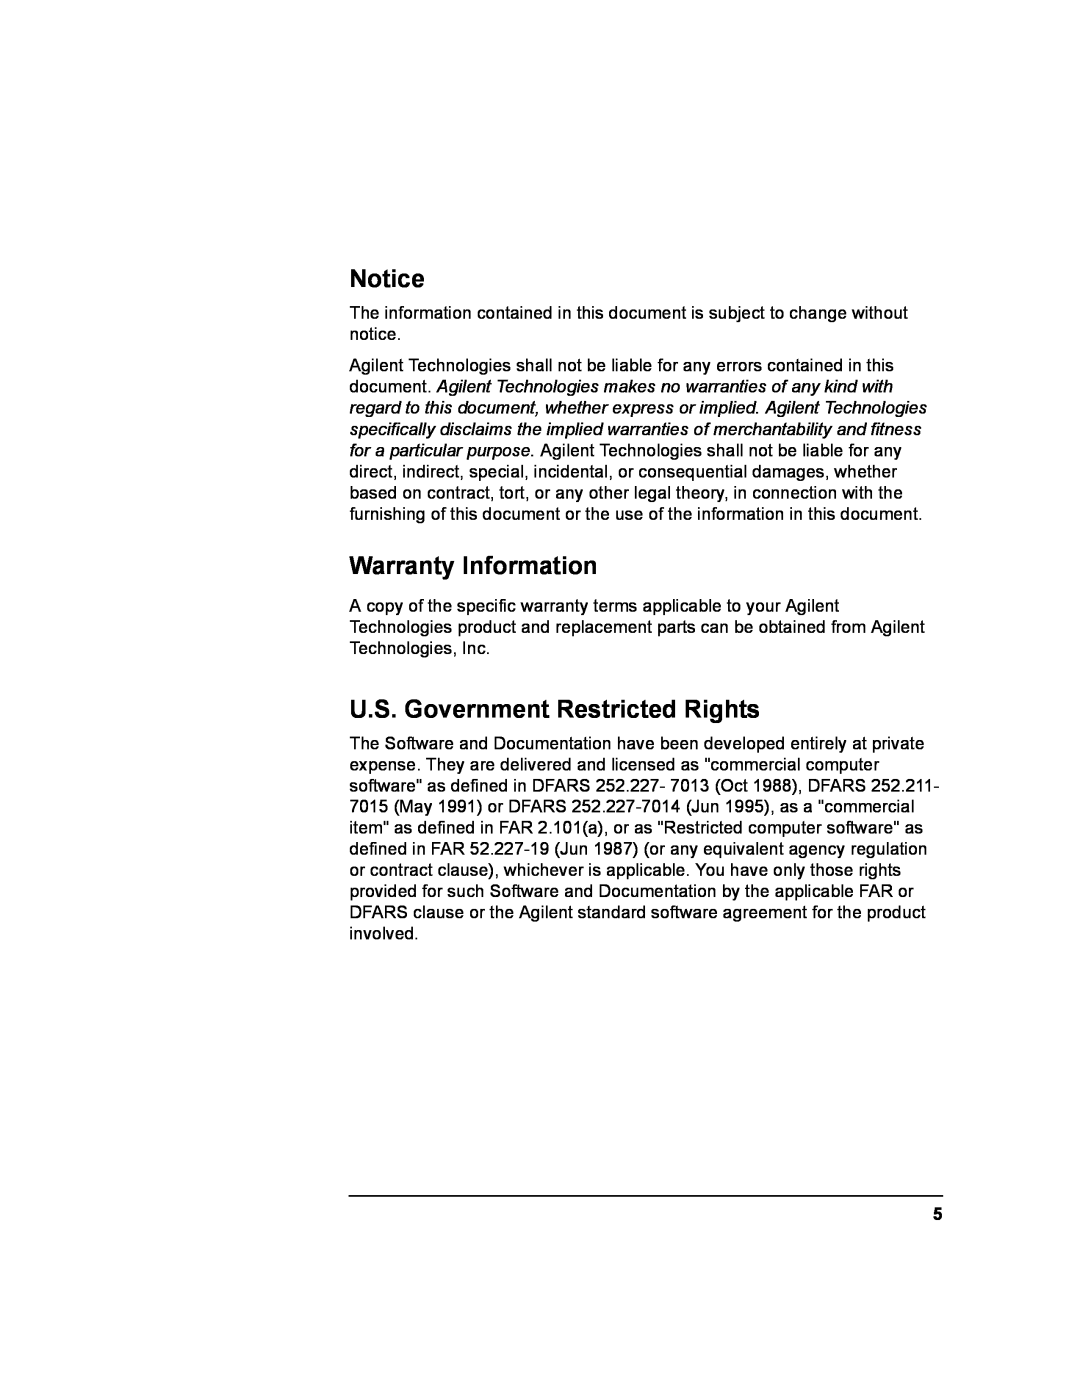 Agilent Technologies E2050-90003 manual Warranty Information, U.S. Government Restricted Rights 